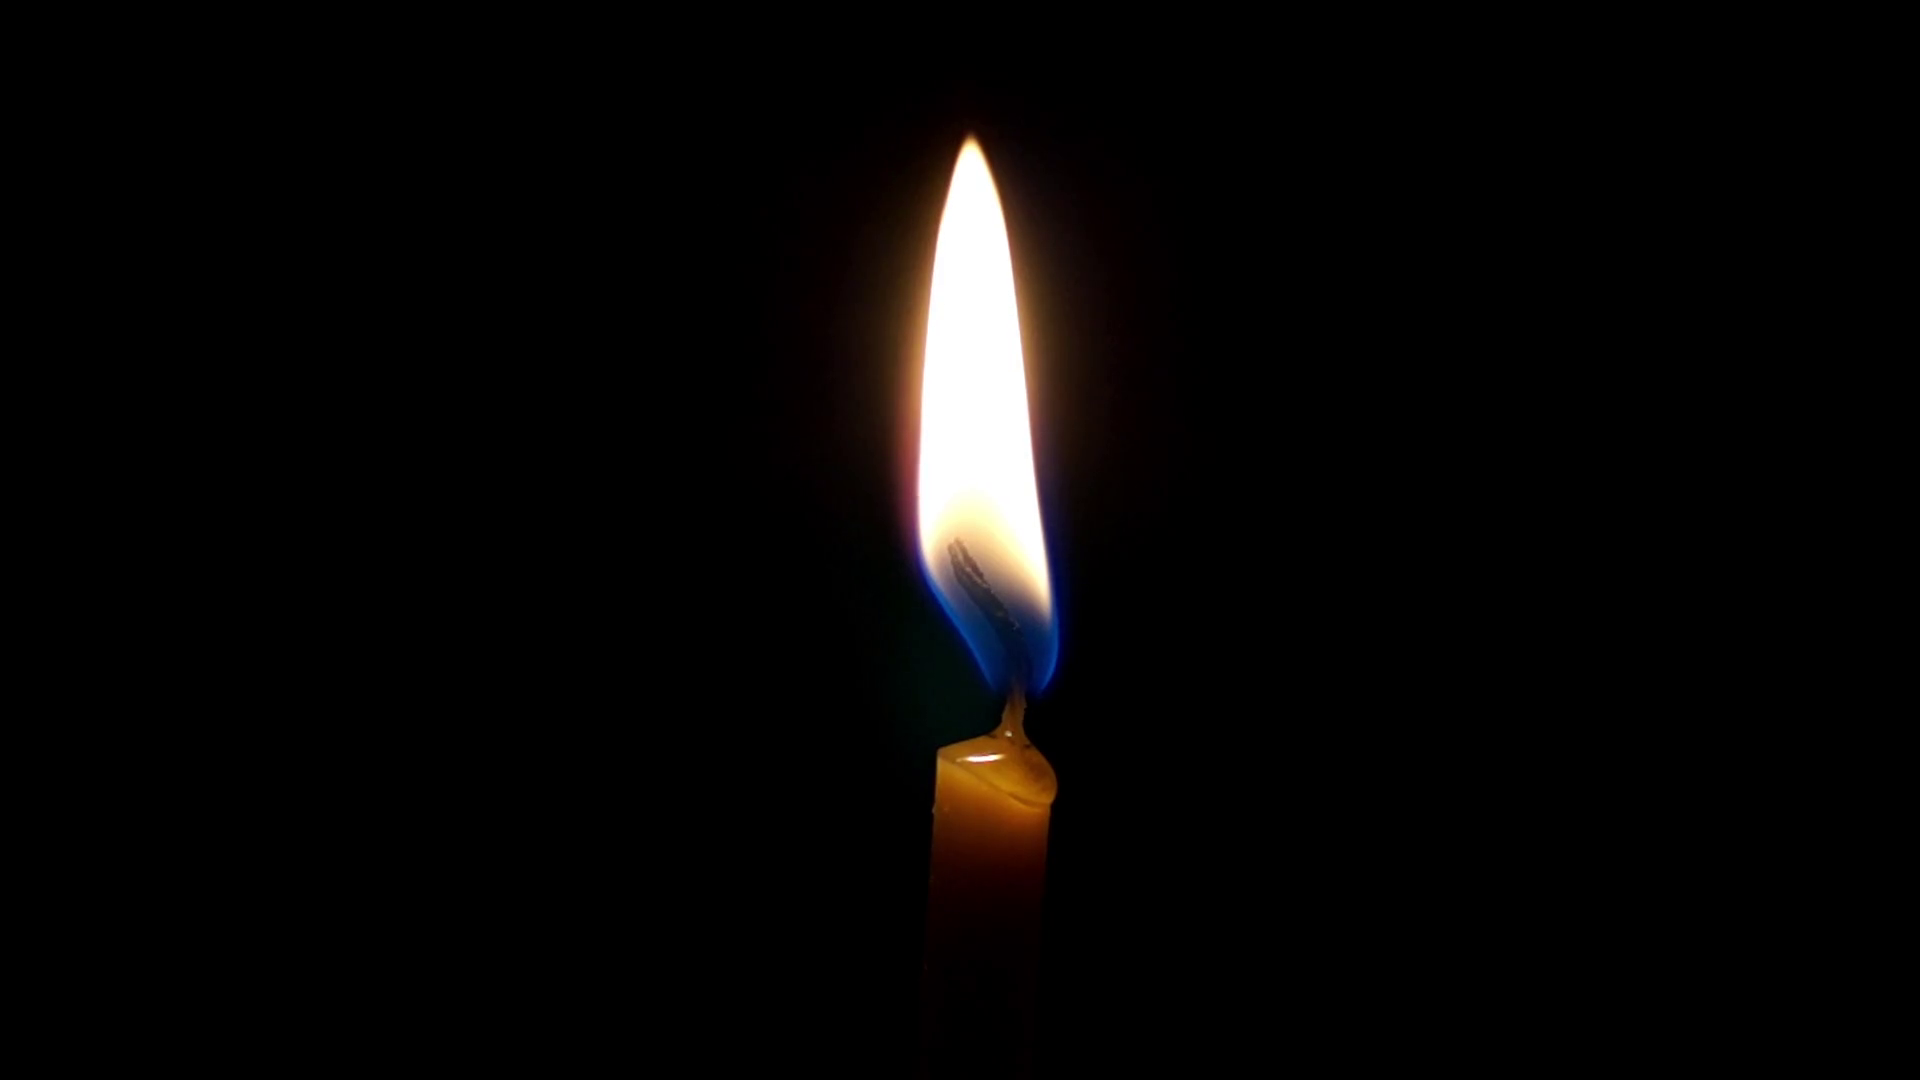 the Candle Flame and Wind Blowing. Stock Video Footage - Videoblocks